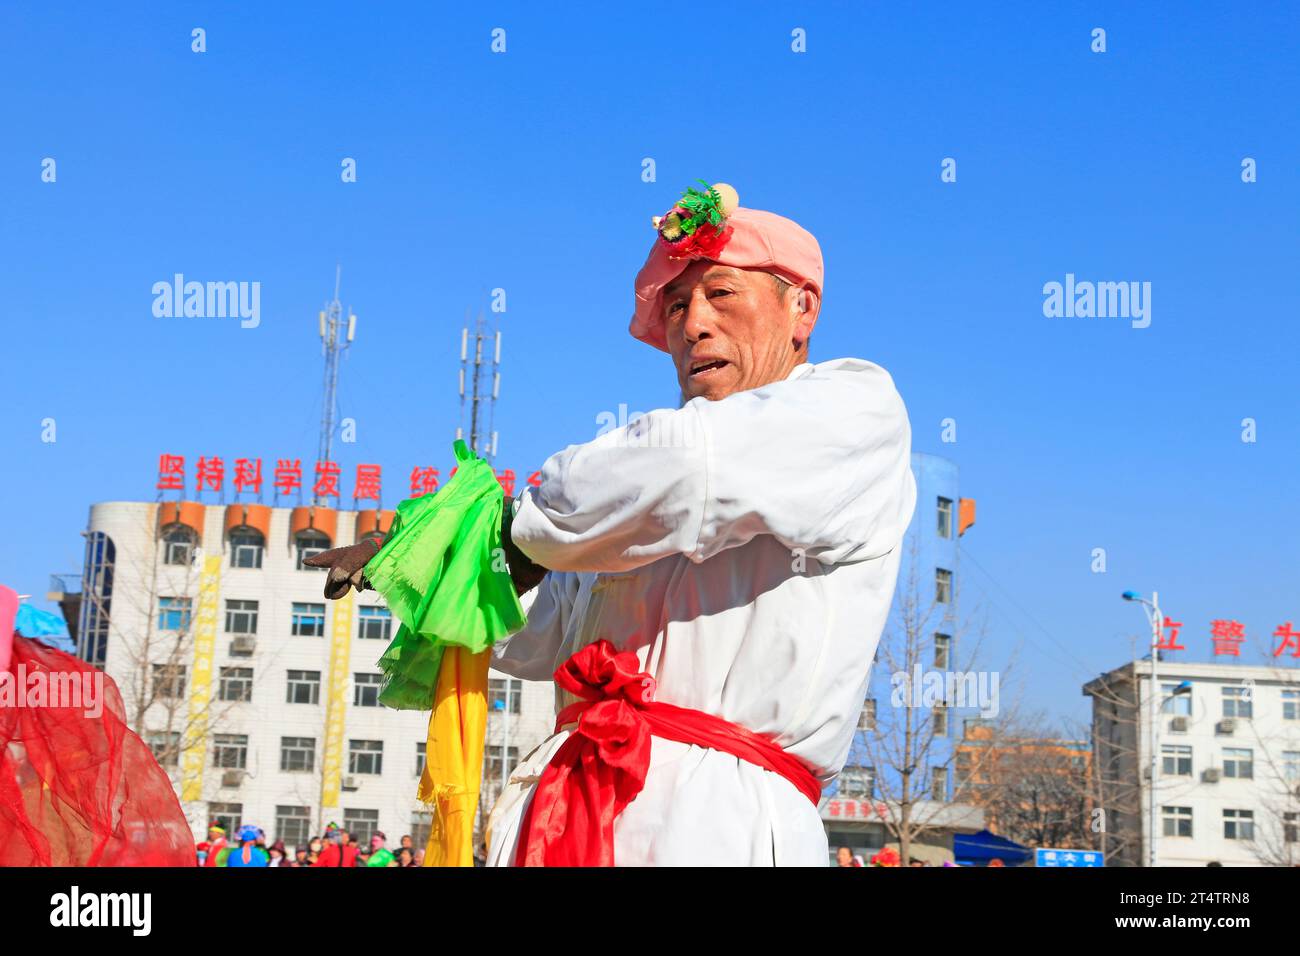 Luannan County- February 20: Chinese traditional style yangko folk dance performance in the street, on February 20, 2016, luannan County, hebei Provin Stock Photo